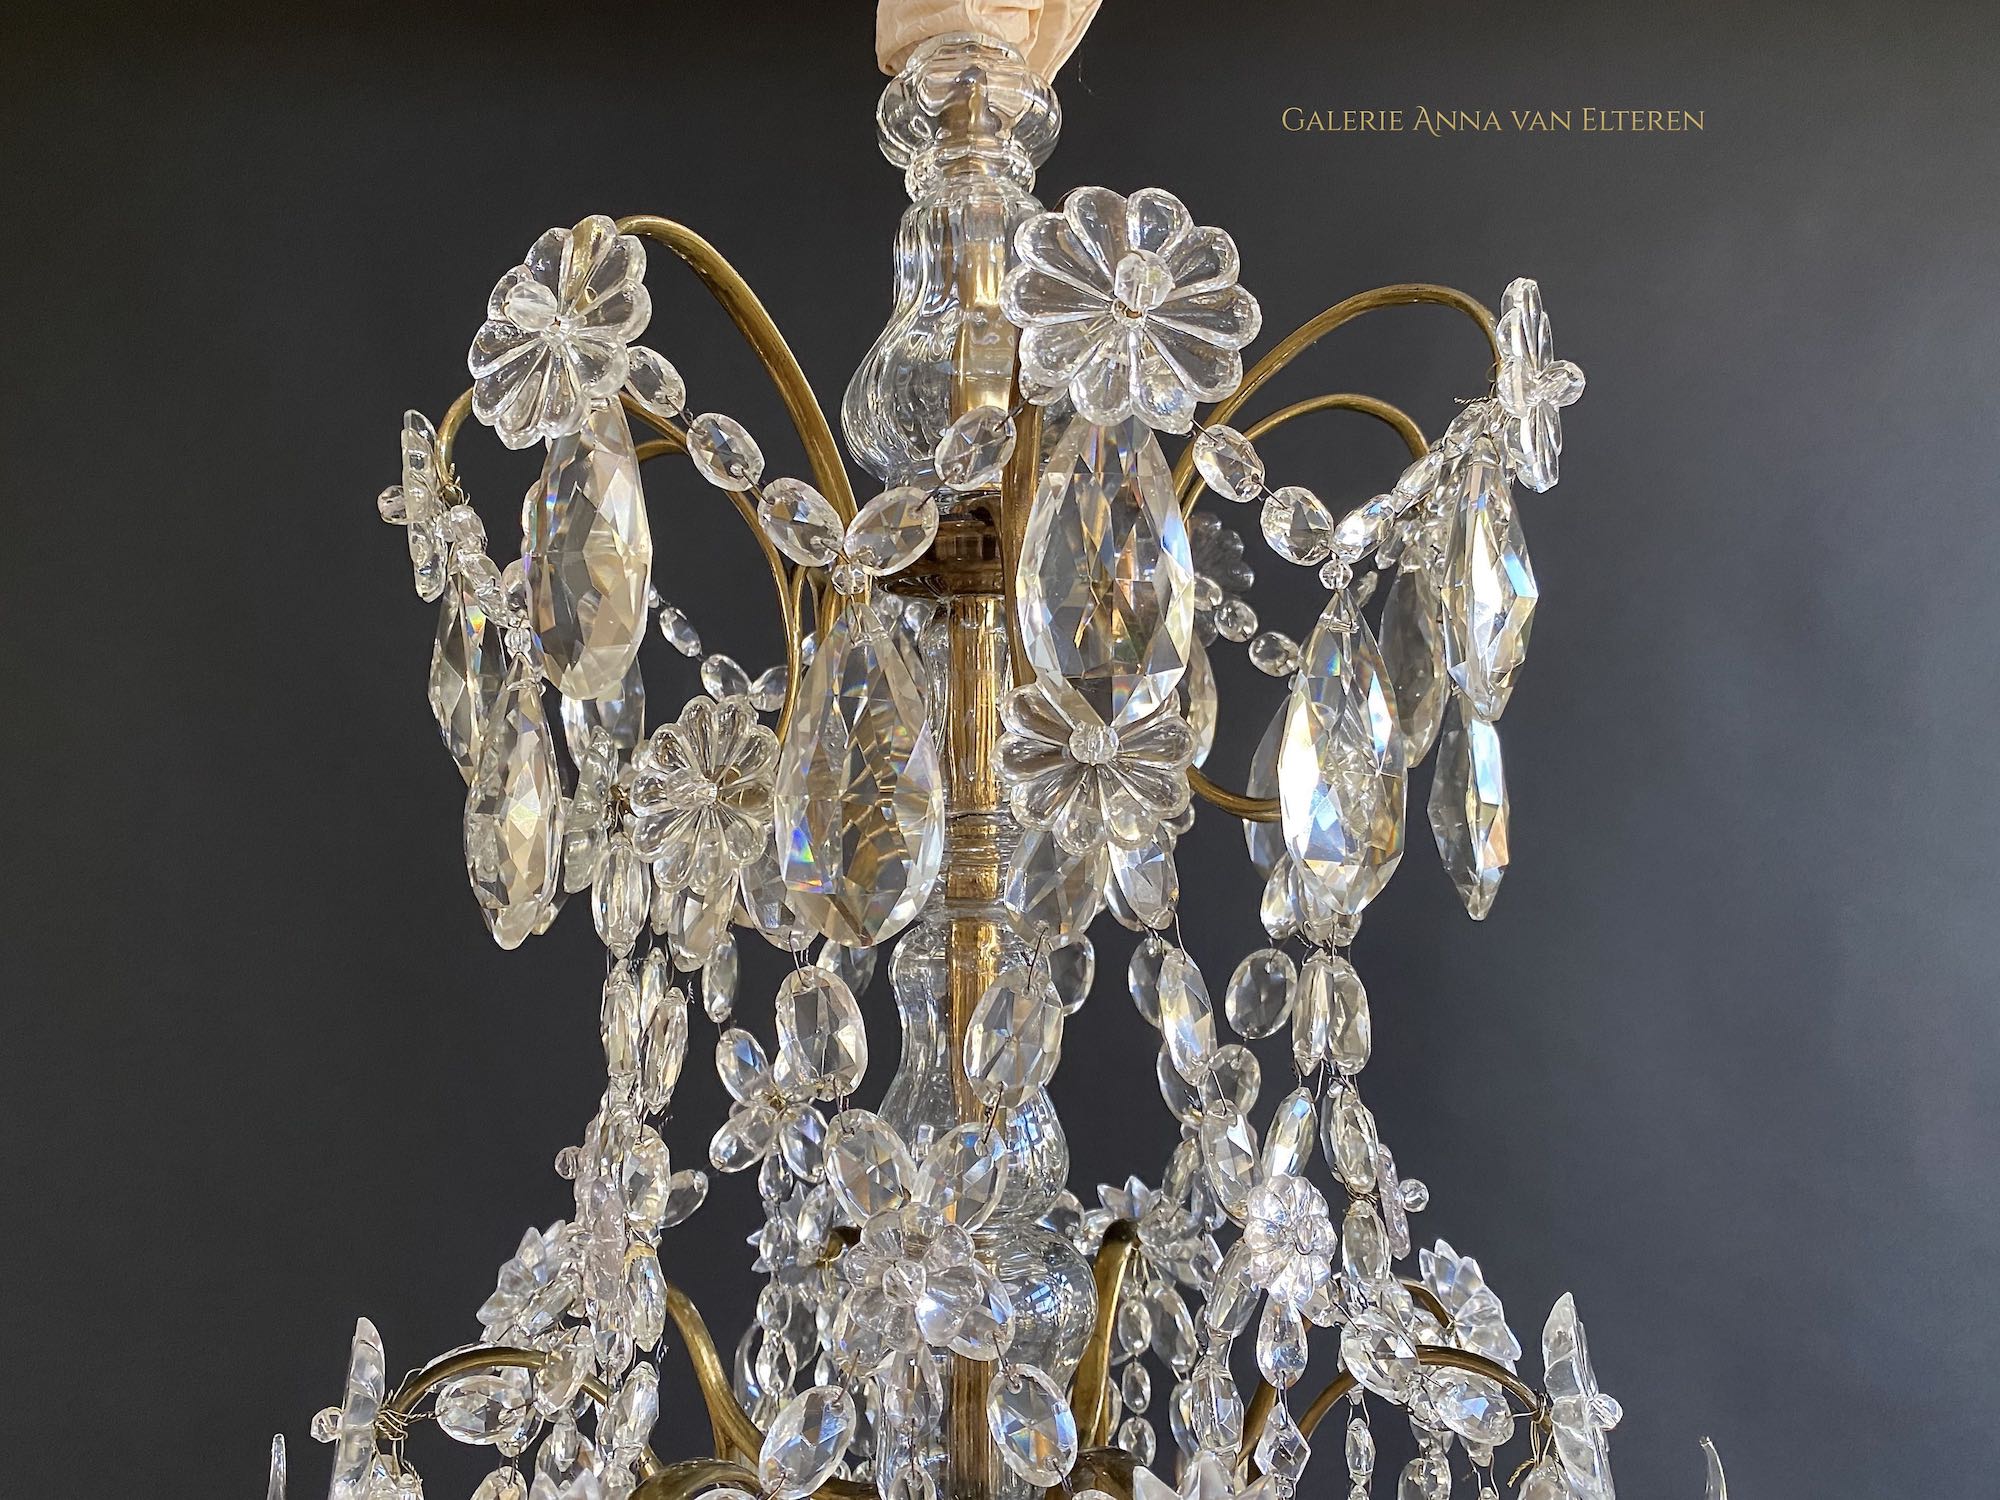 Large 19th c. Rococo style antique chandelier